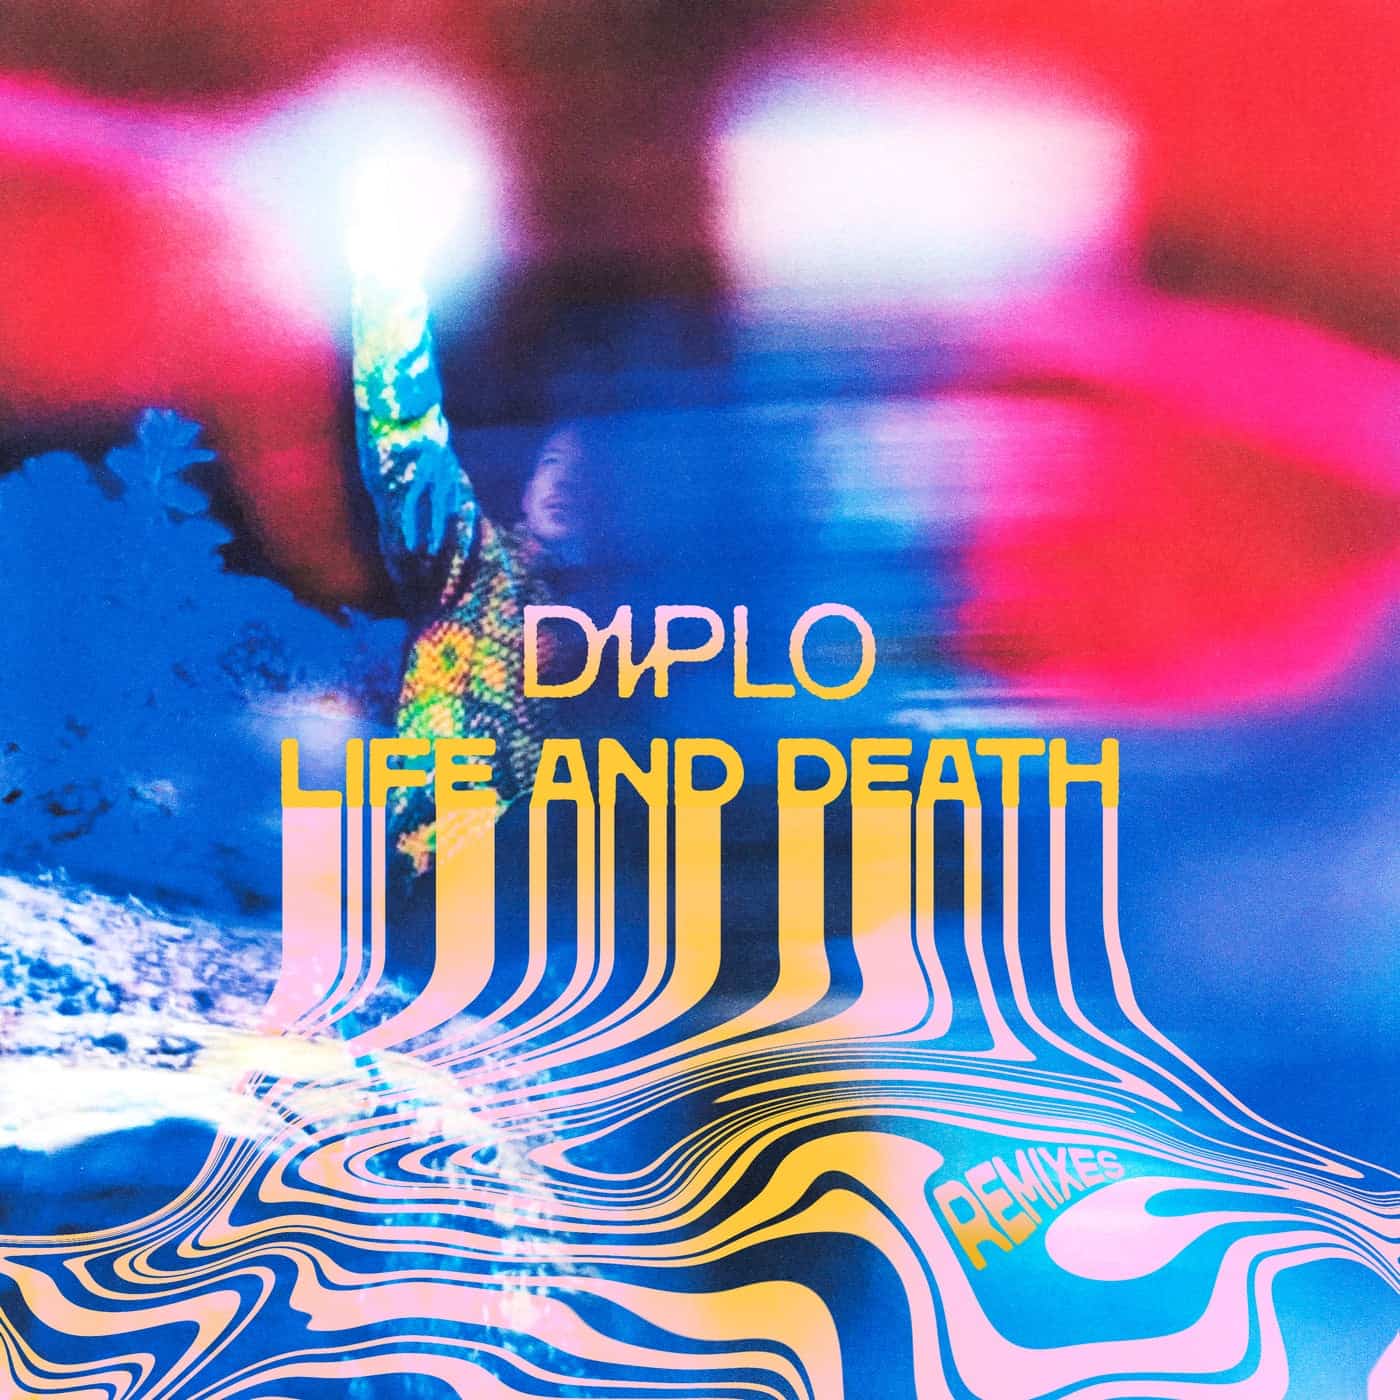 image cover: VA - Diplo (Life and Death Remixes (Extended)) / HIGH103E